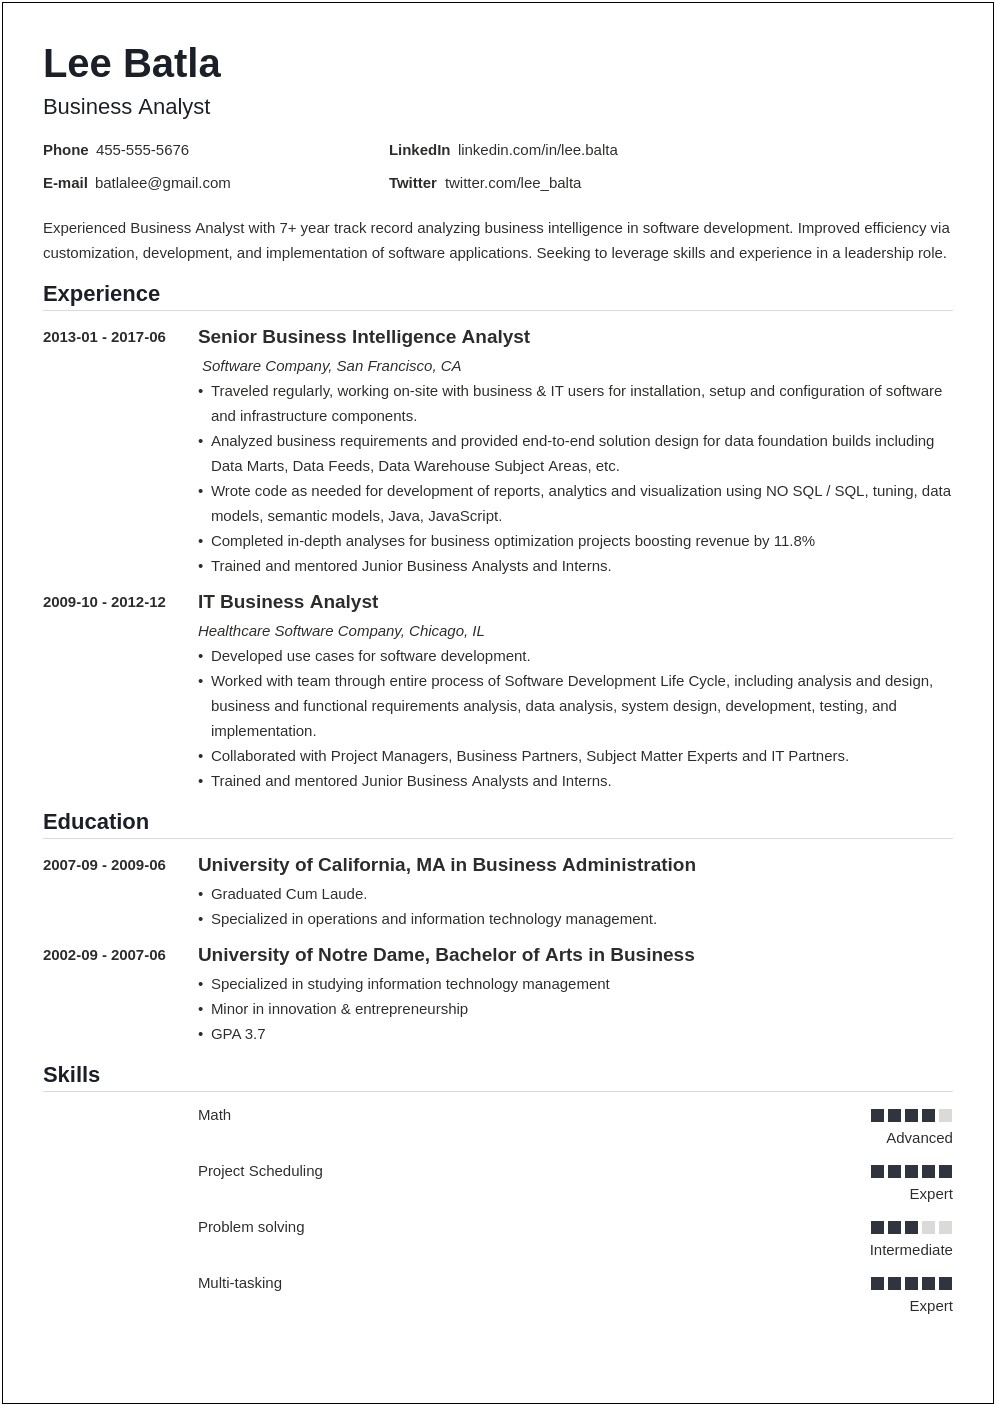 Tailor Resume For Business Systems Analyst Job